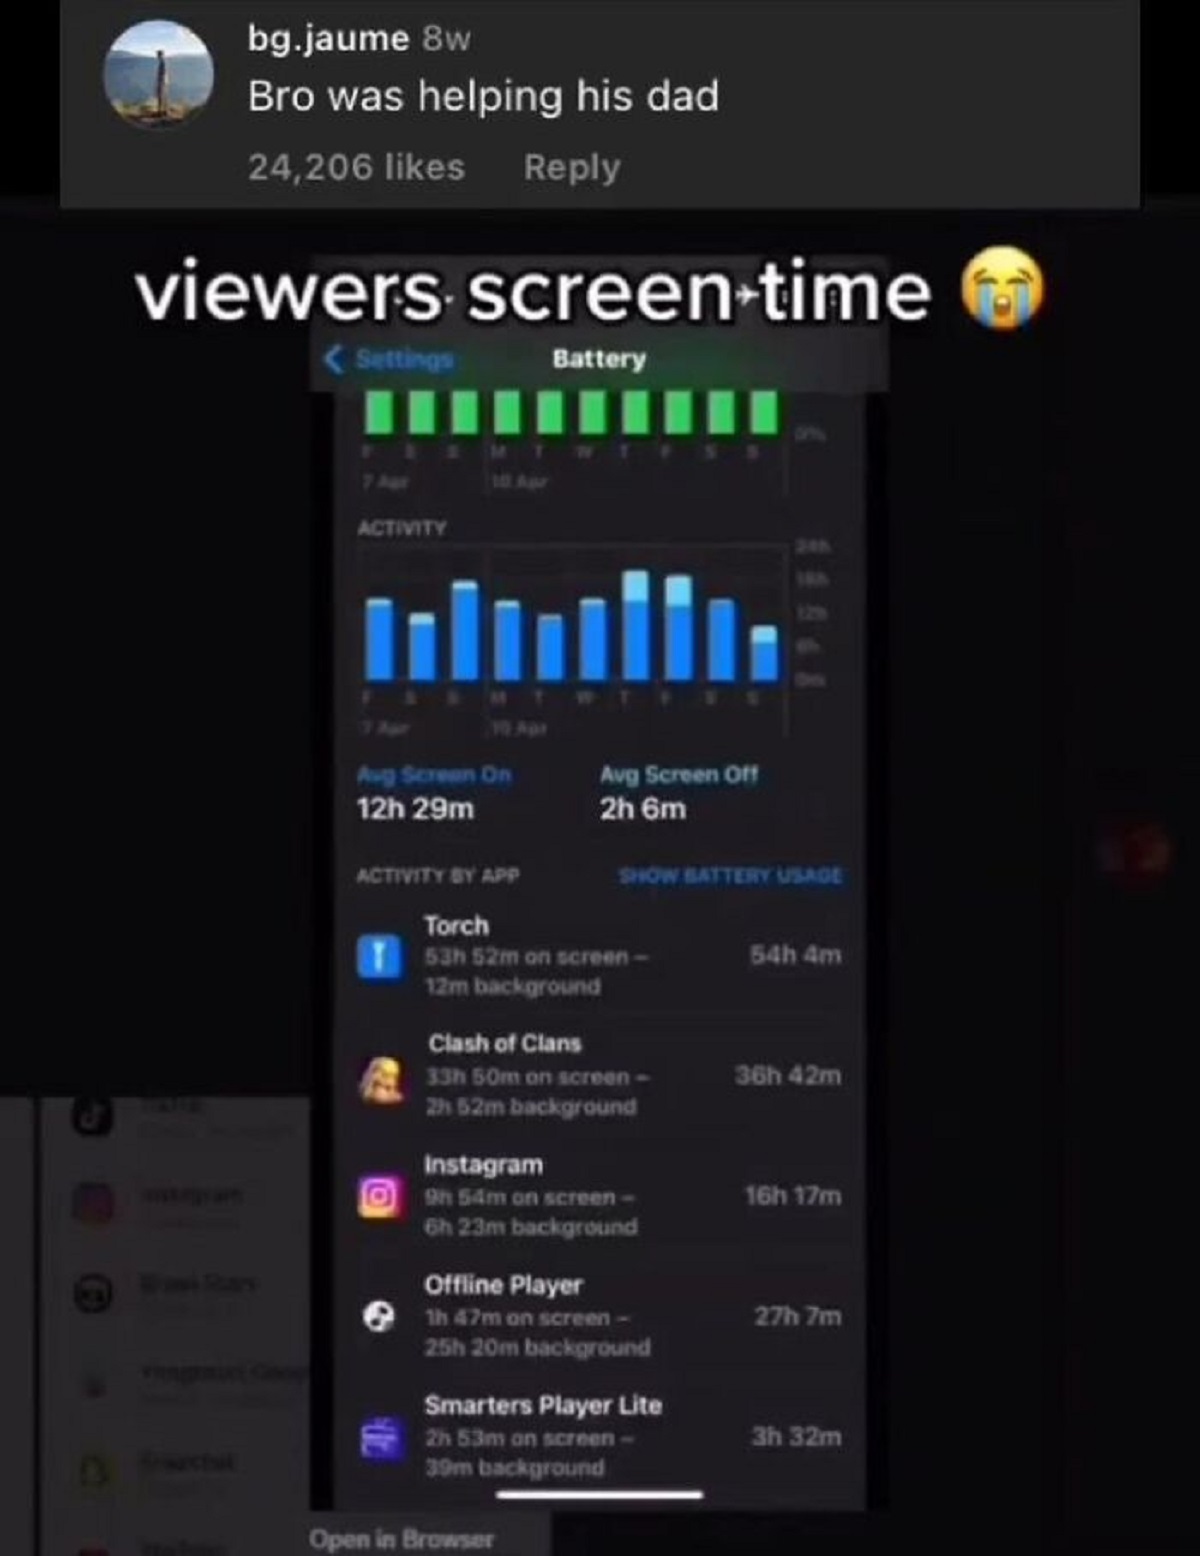 software - bg.jaume 8w Bro was helping his dad 24,206 viewers screentime Settings Eemt Activity l Aug Screen On 12h 29m Battery || Avg Screen Off 2h 6m Activity By App Torch 53h 52m on screen 12m background Show Battery Usage Clash of Clans 33h 50m on scr